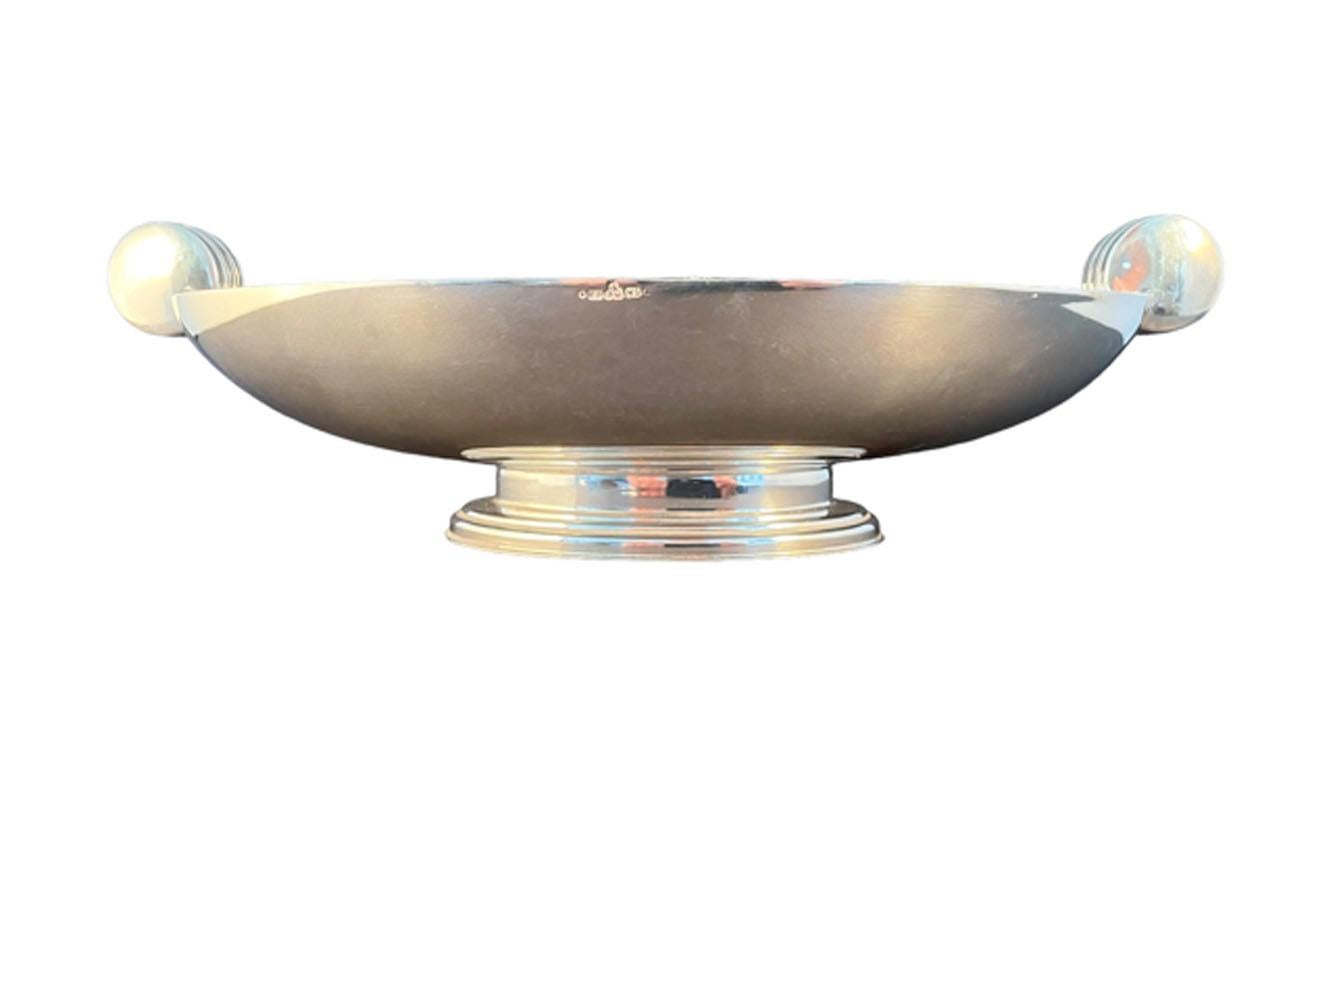 English Art Deco silver plate footed bowl of oval form with vertical disk handles with reeded edge. Incomplete hallmark (..... '&' over F.M.) upper part missing.